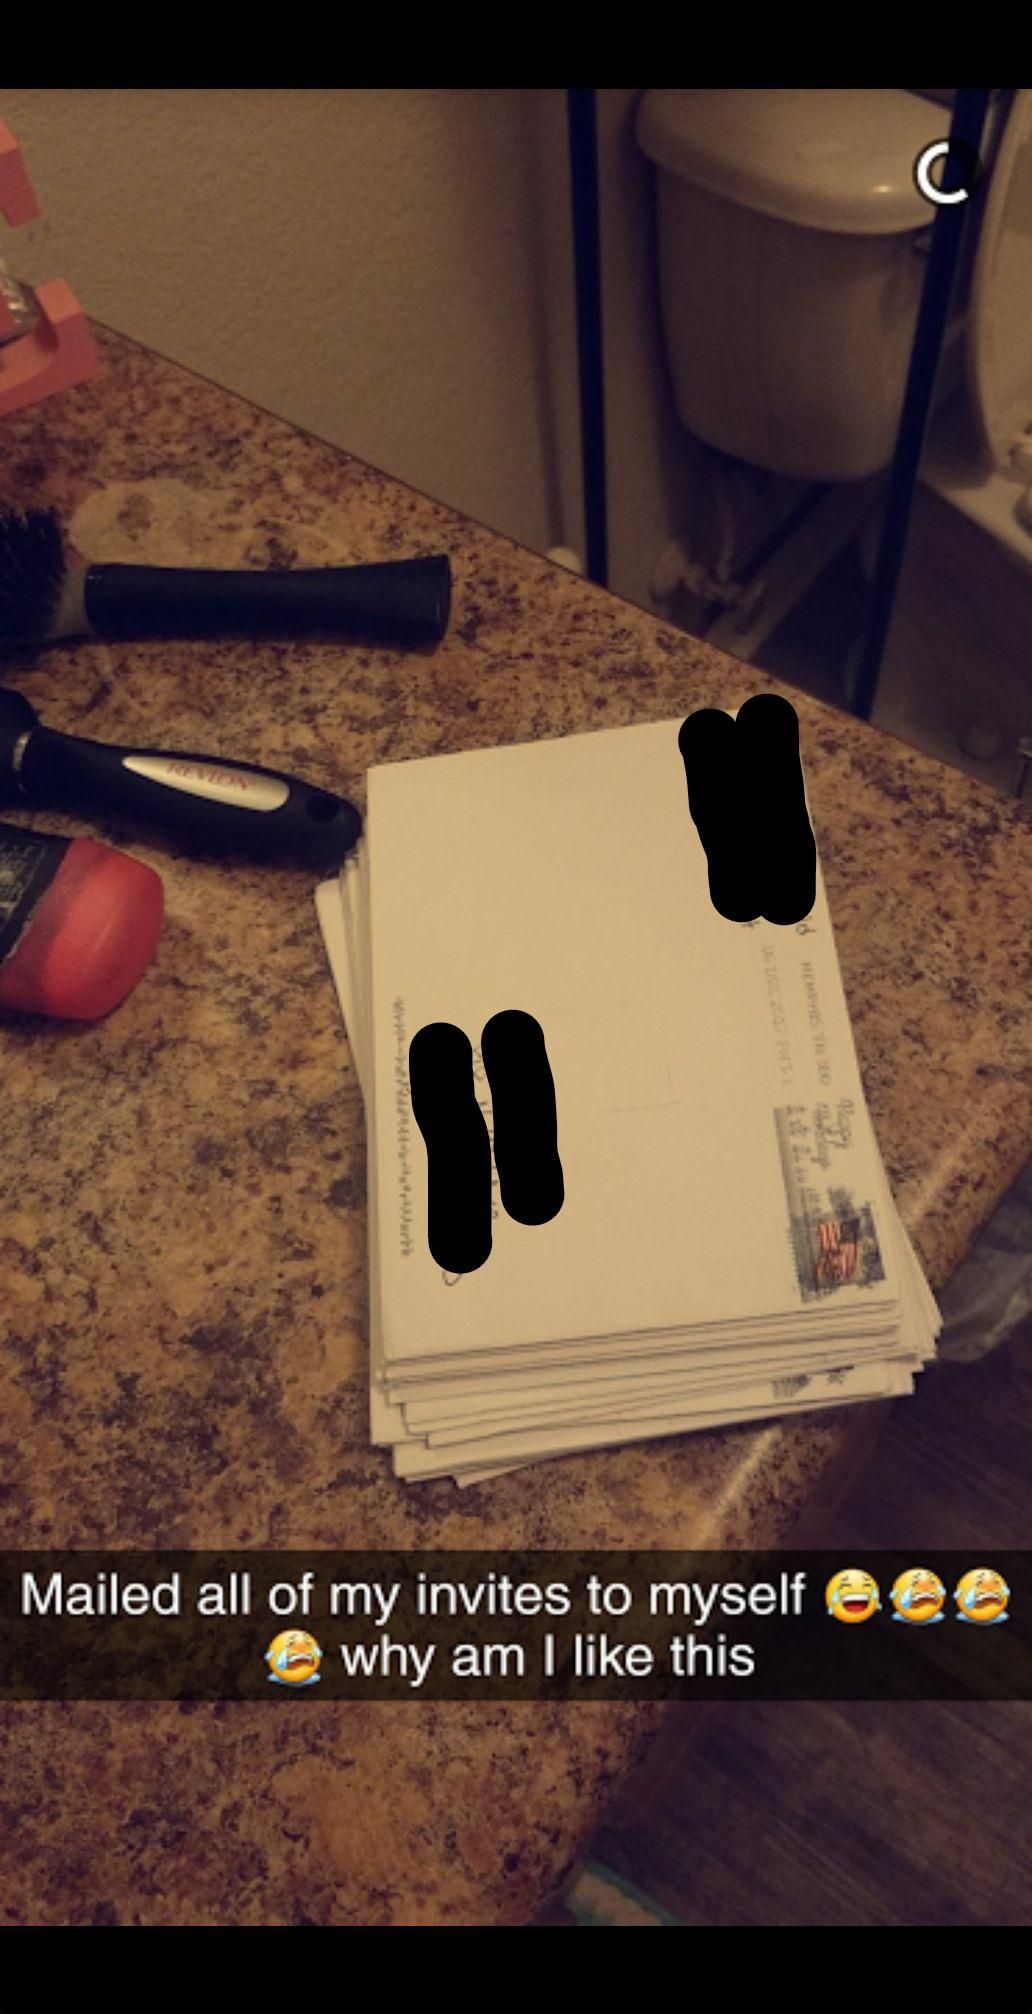 My sister mailed her college graduation invitations to herself.